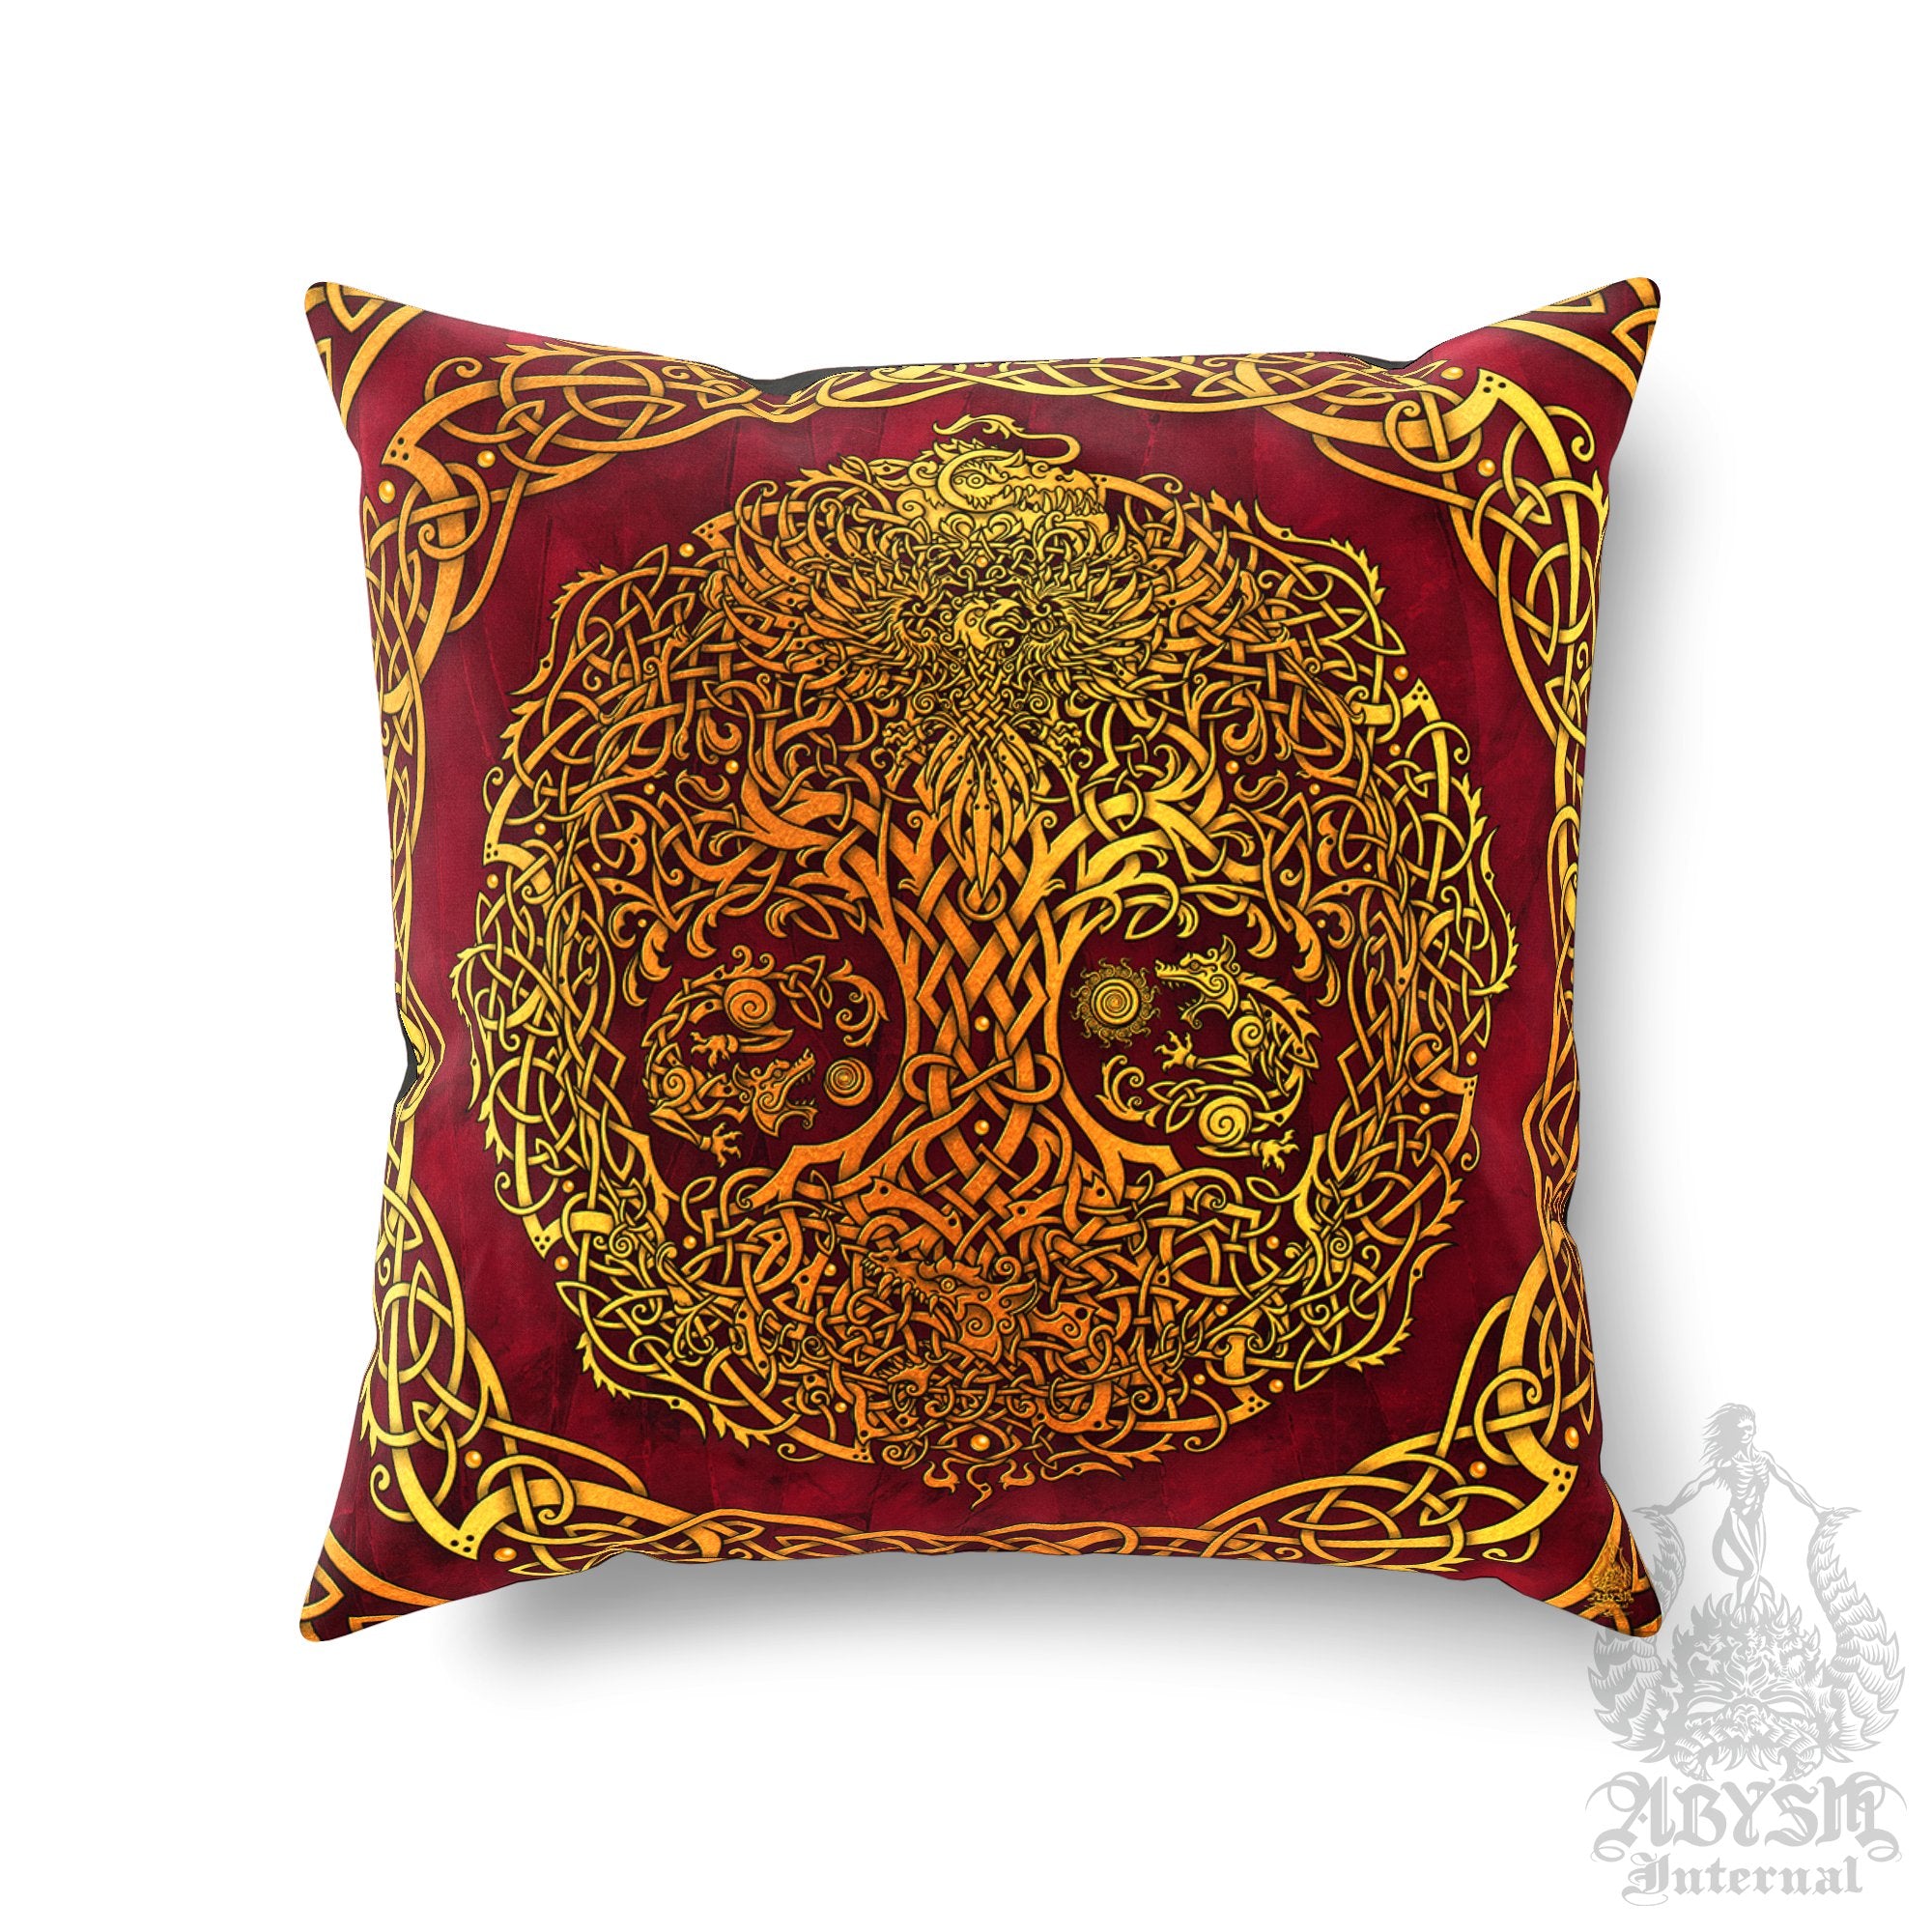 Viking Throw Pillow, Decorative Accent Pillow, Square Cushion Cover, Yggdrasil, Norse Decor, Nordic Art, Alternative Home - Tree of Life, Gold & 3 Colors - Abysm Internal